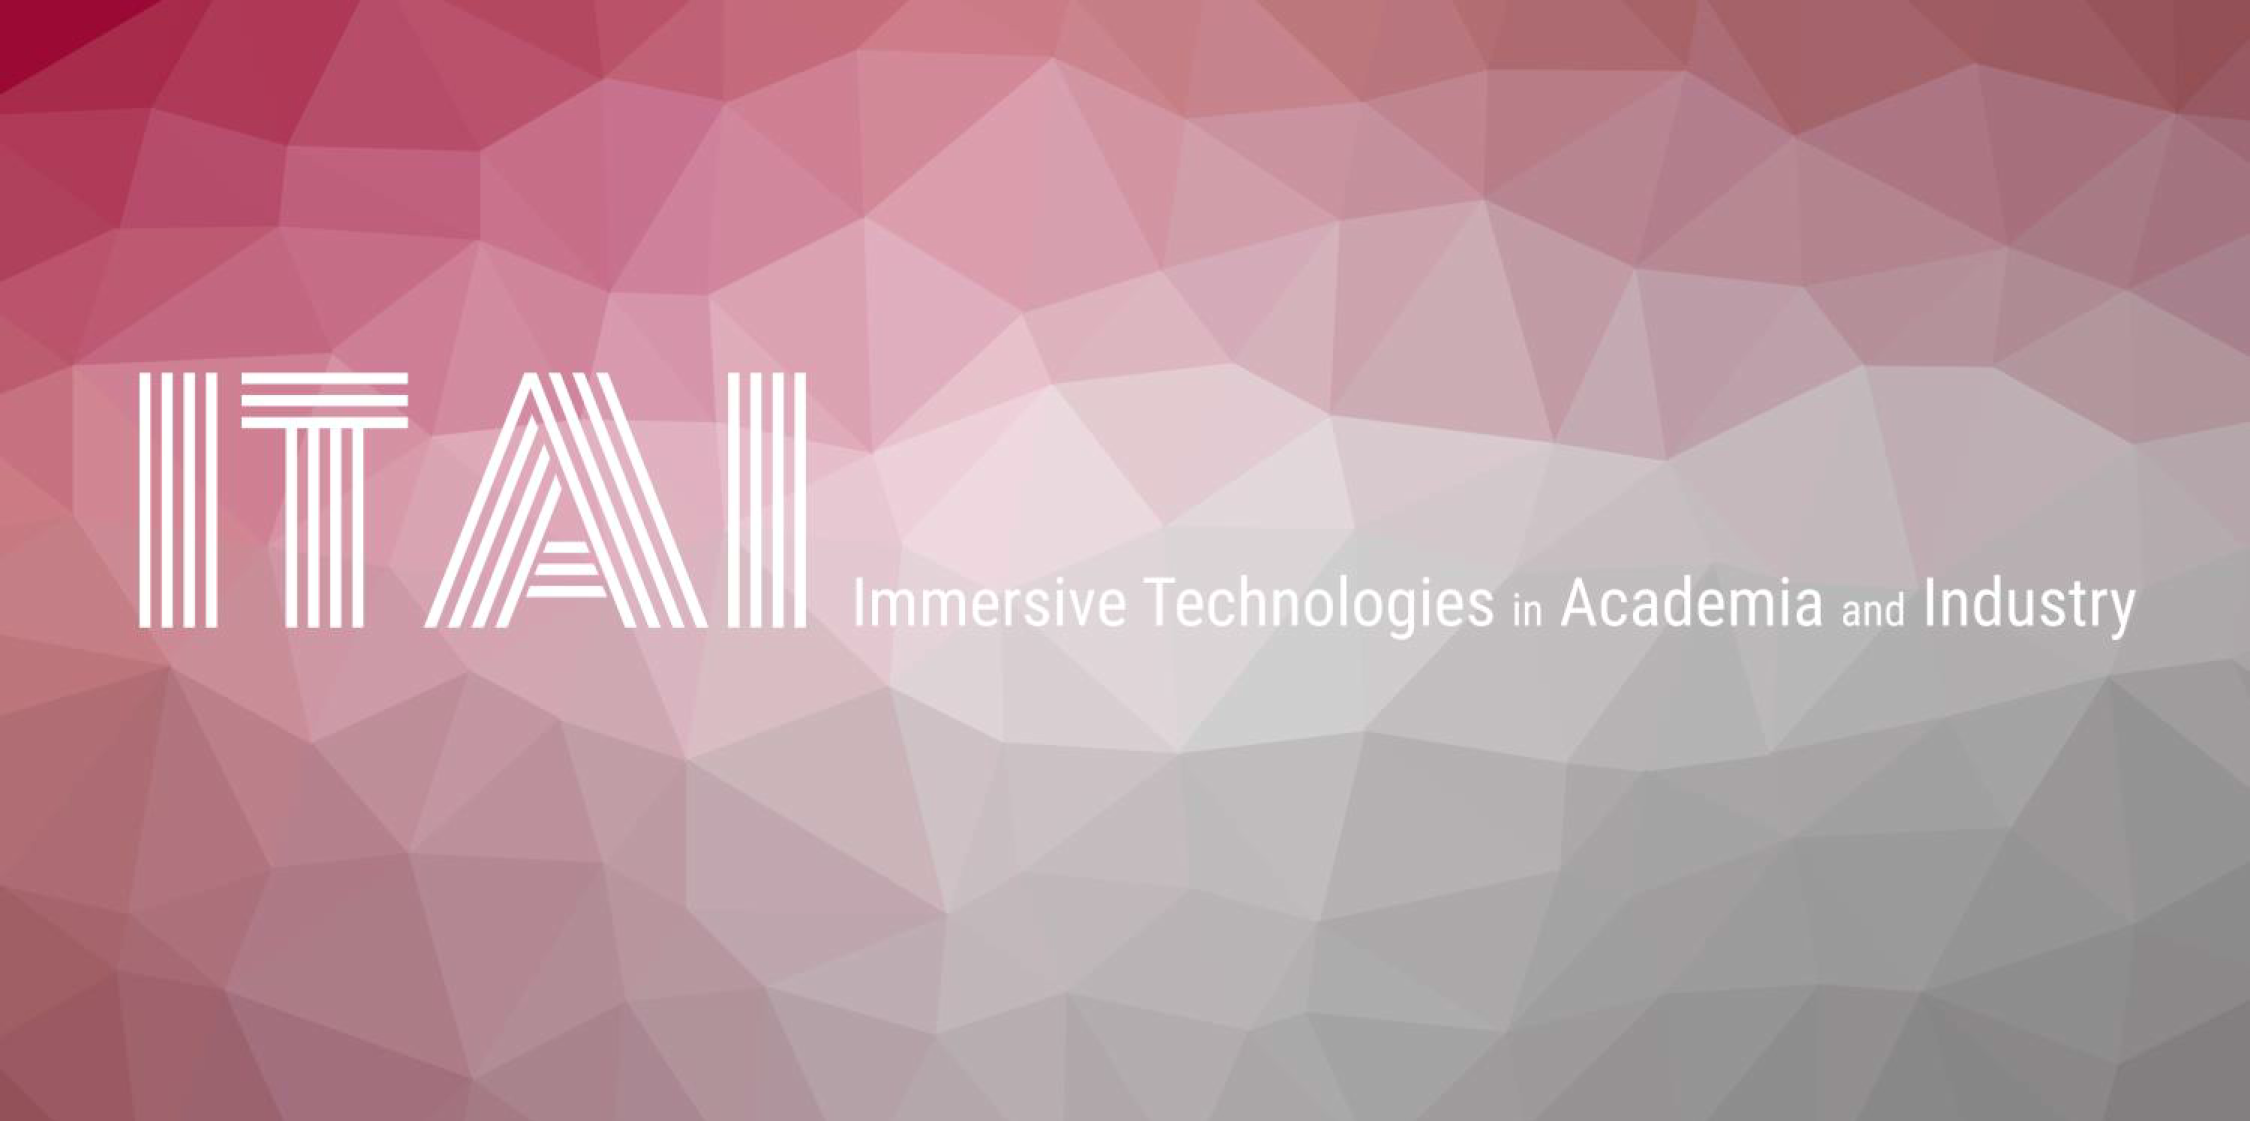 Immersive Technologies in Academia and Industry 2019